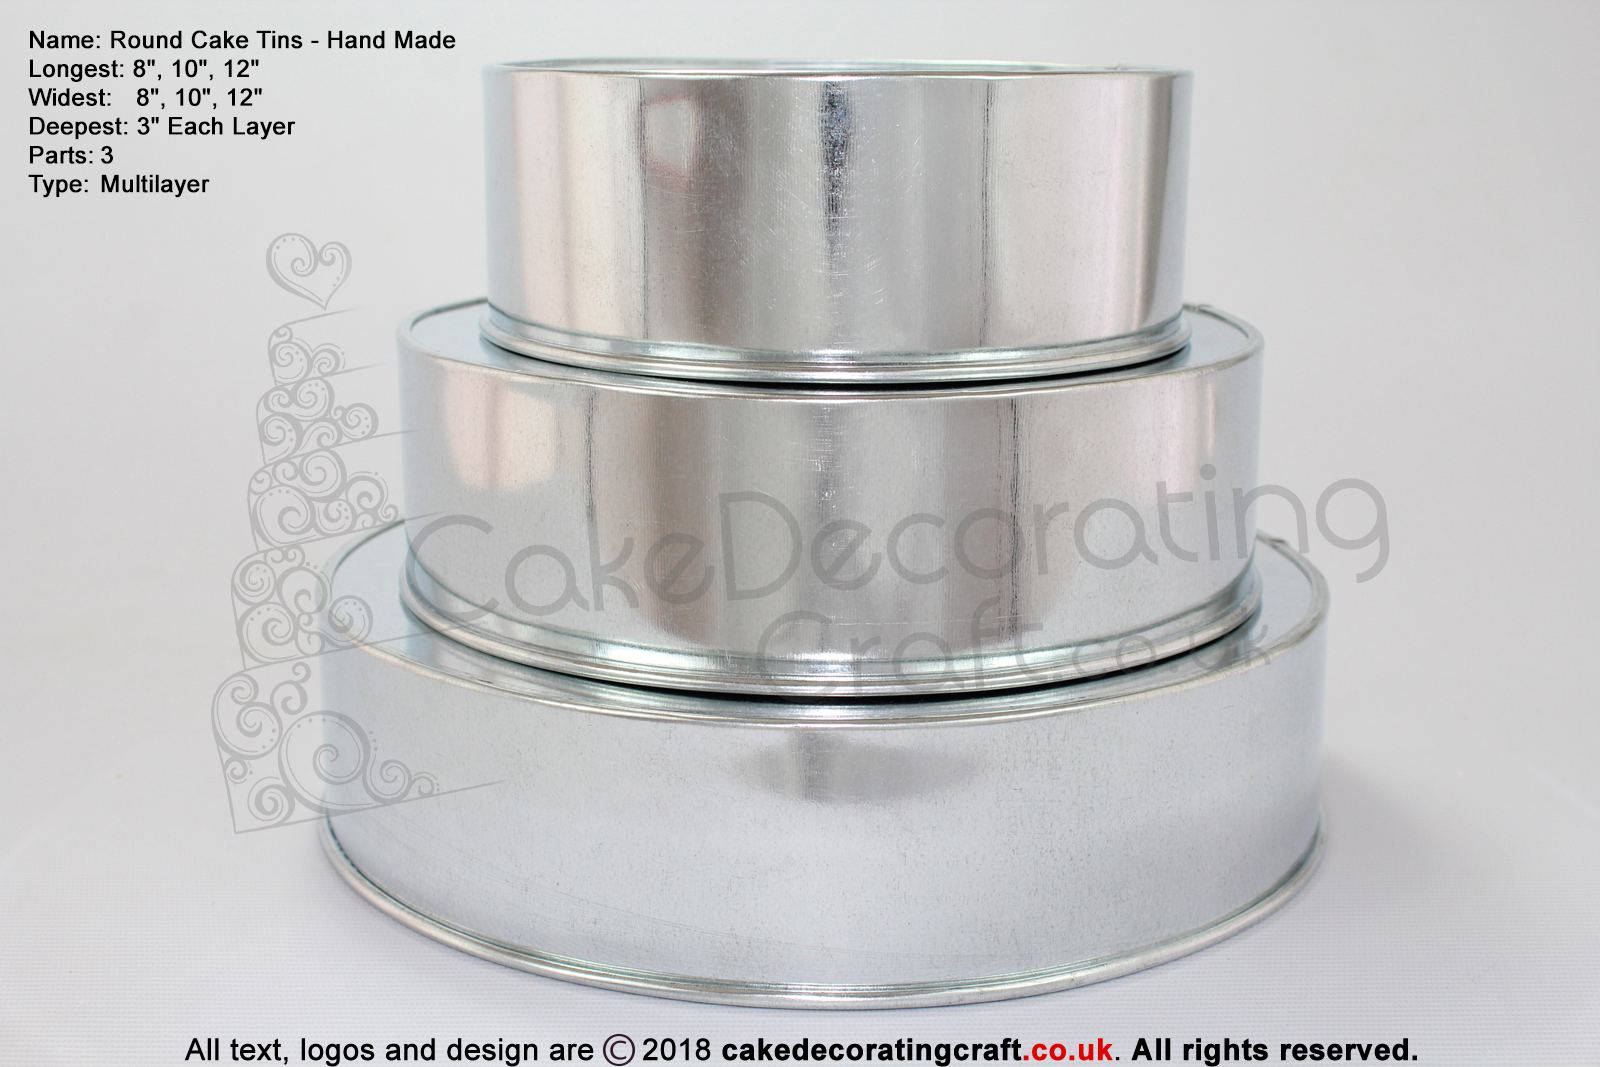 Round Cake Baking Tin | 3" Deep | Size 8 10 12 " | 3 Tiers | Hand Made